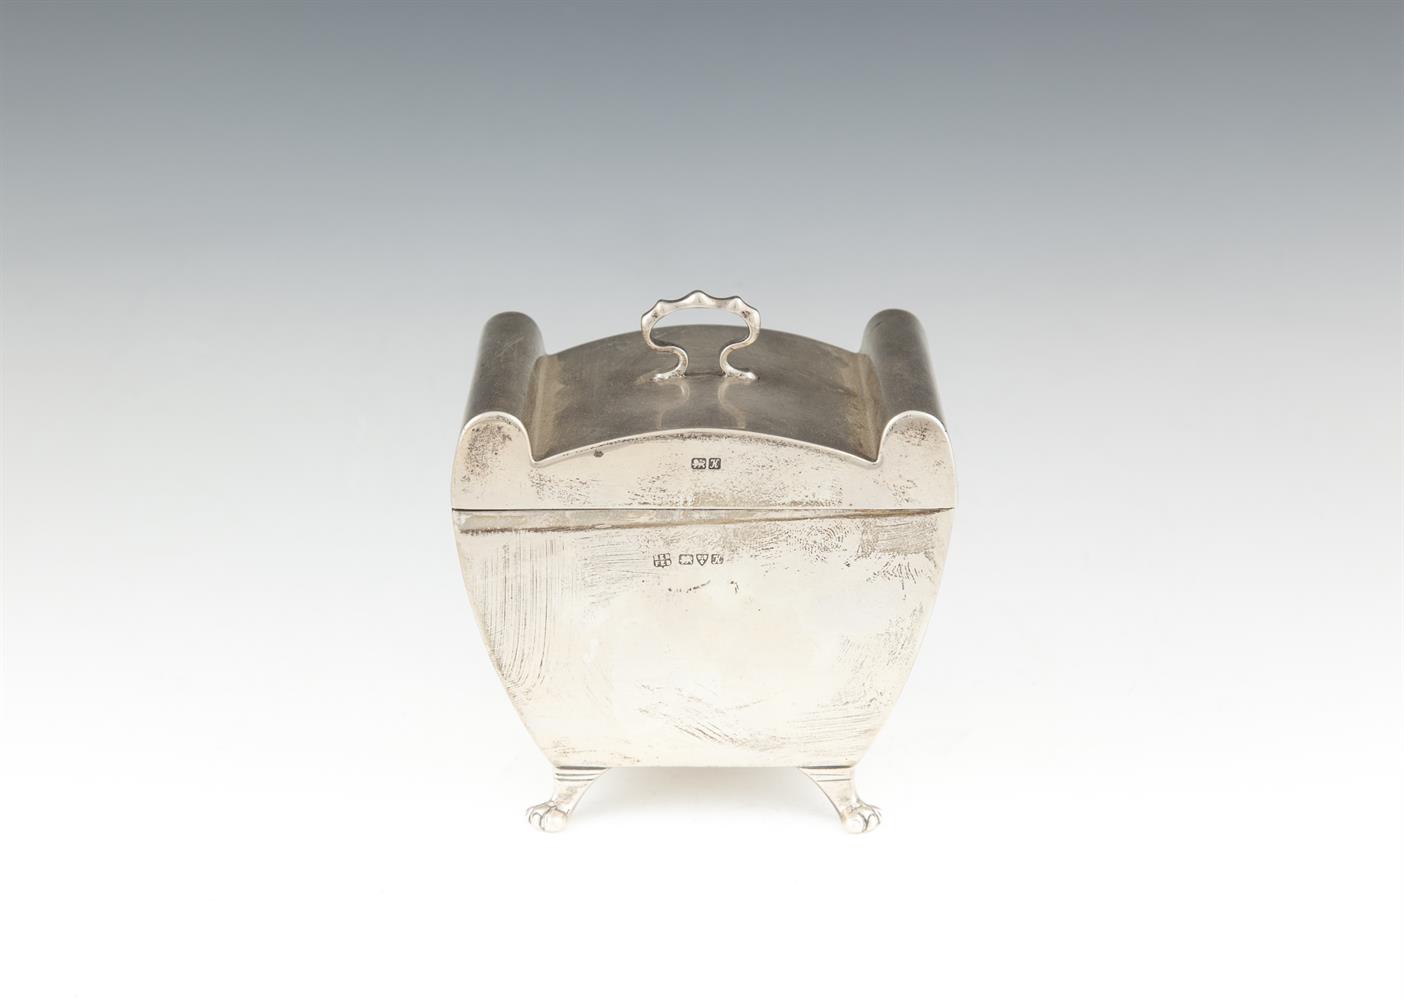 AN EDWARDIAN SILVER TEA CADDY, Chester 1910, makers mark of Barker Brothers, of bombée form, the